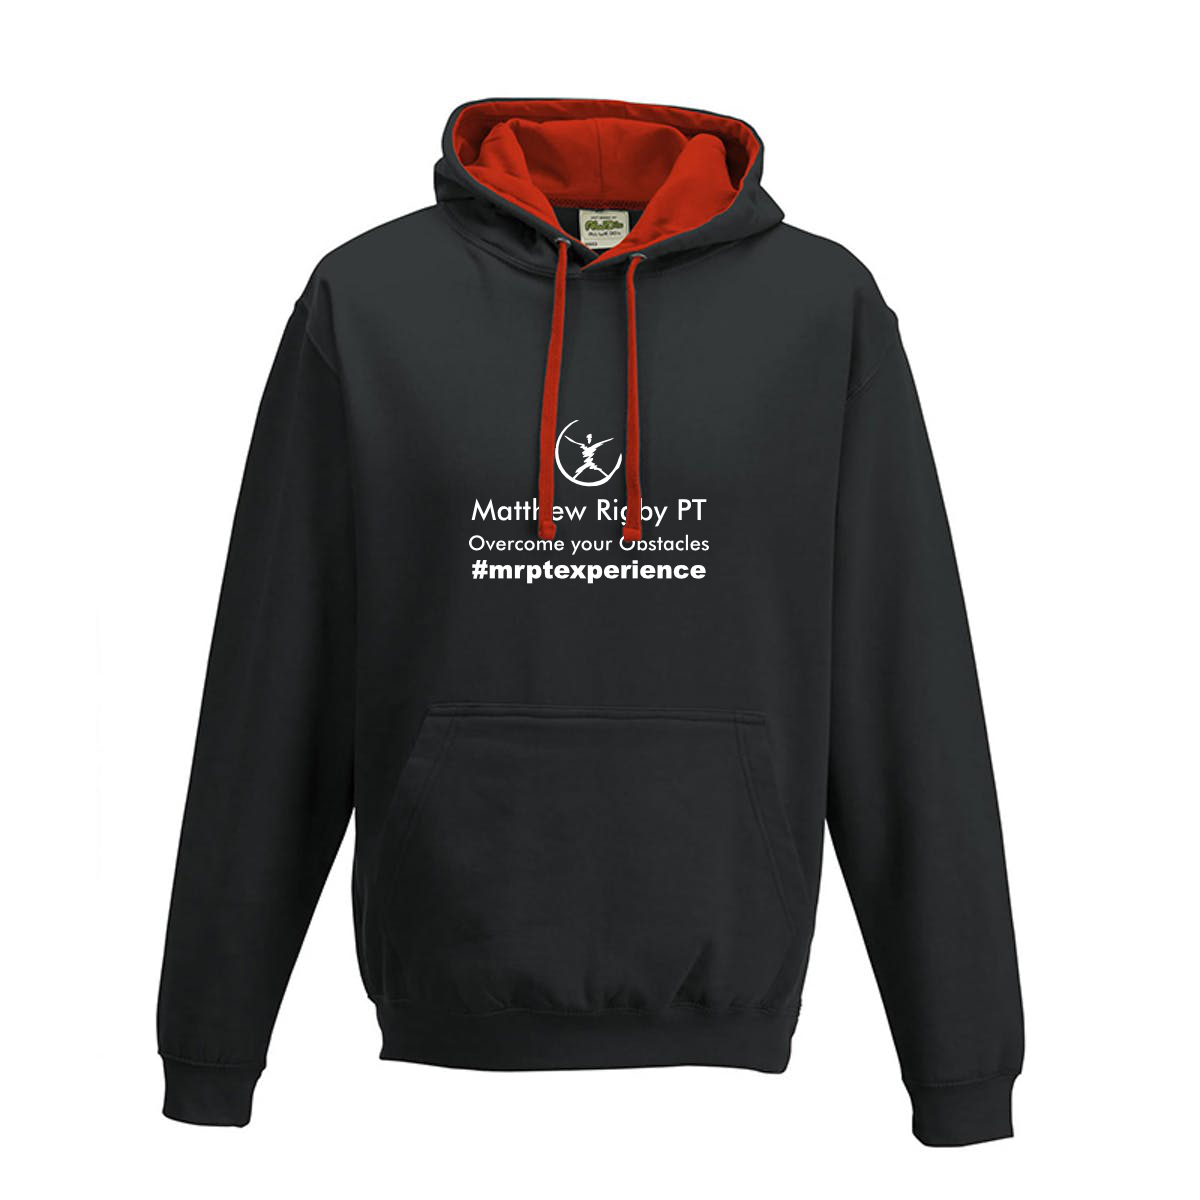 #mrptexperience Hoody Red/black or black/red - MySports and More